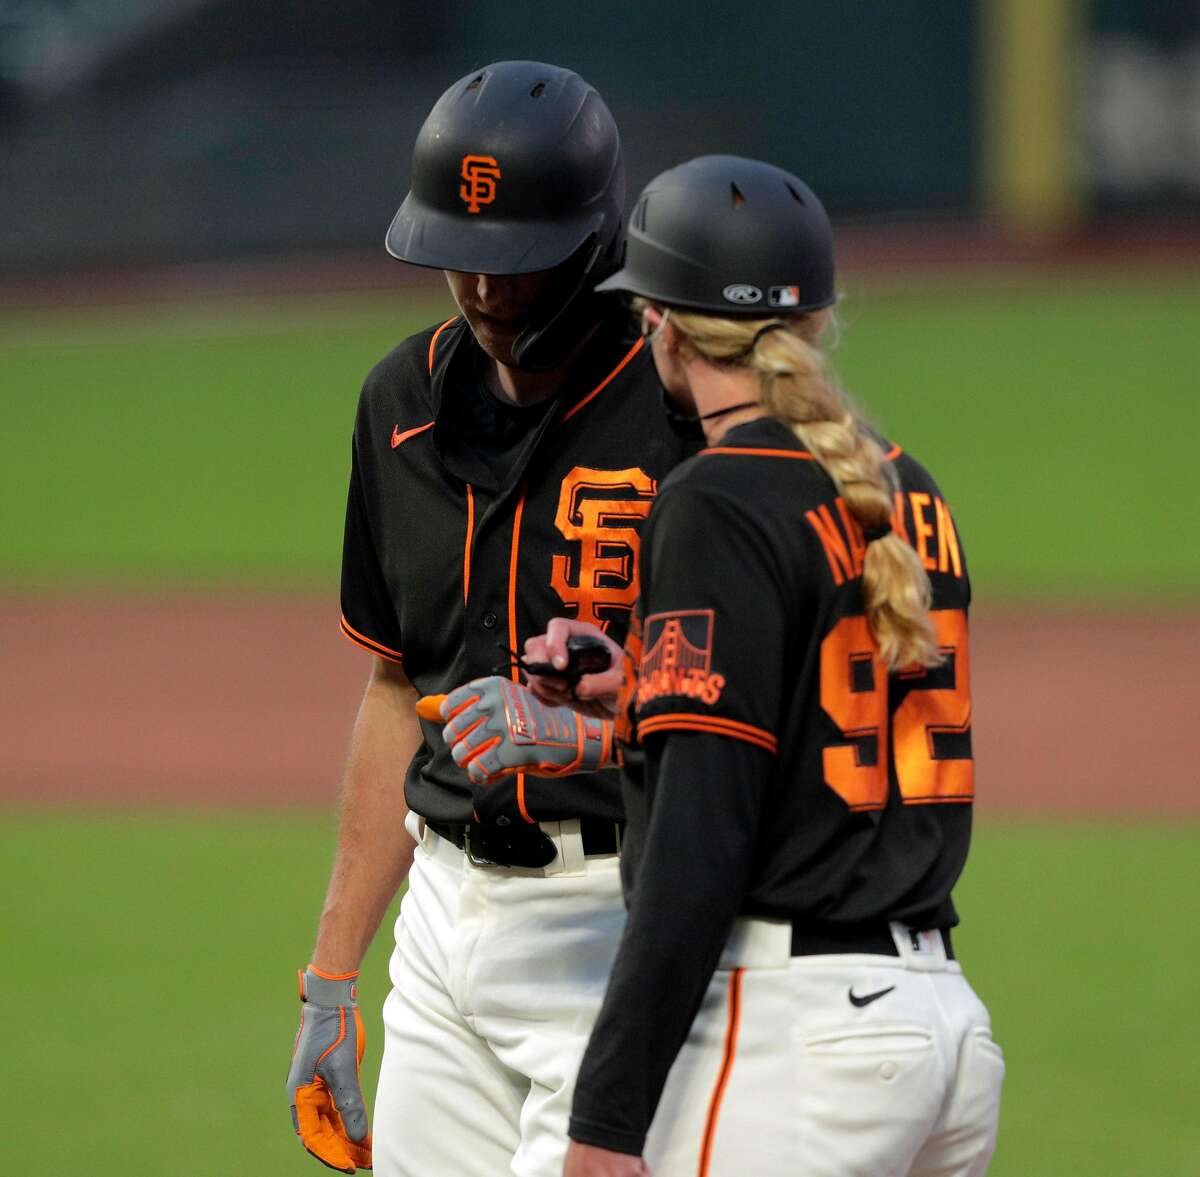 Giants designate outfielder Hunter Pence for assignment - The Boston Globe